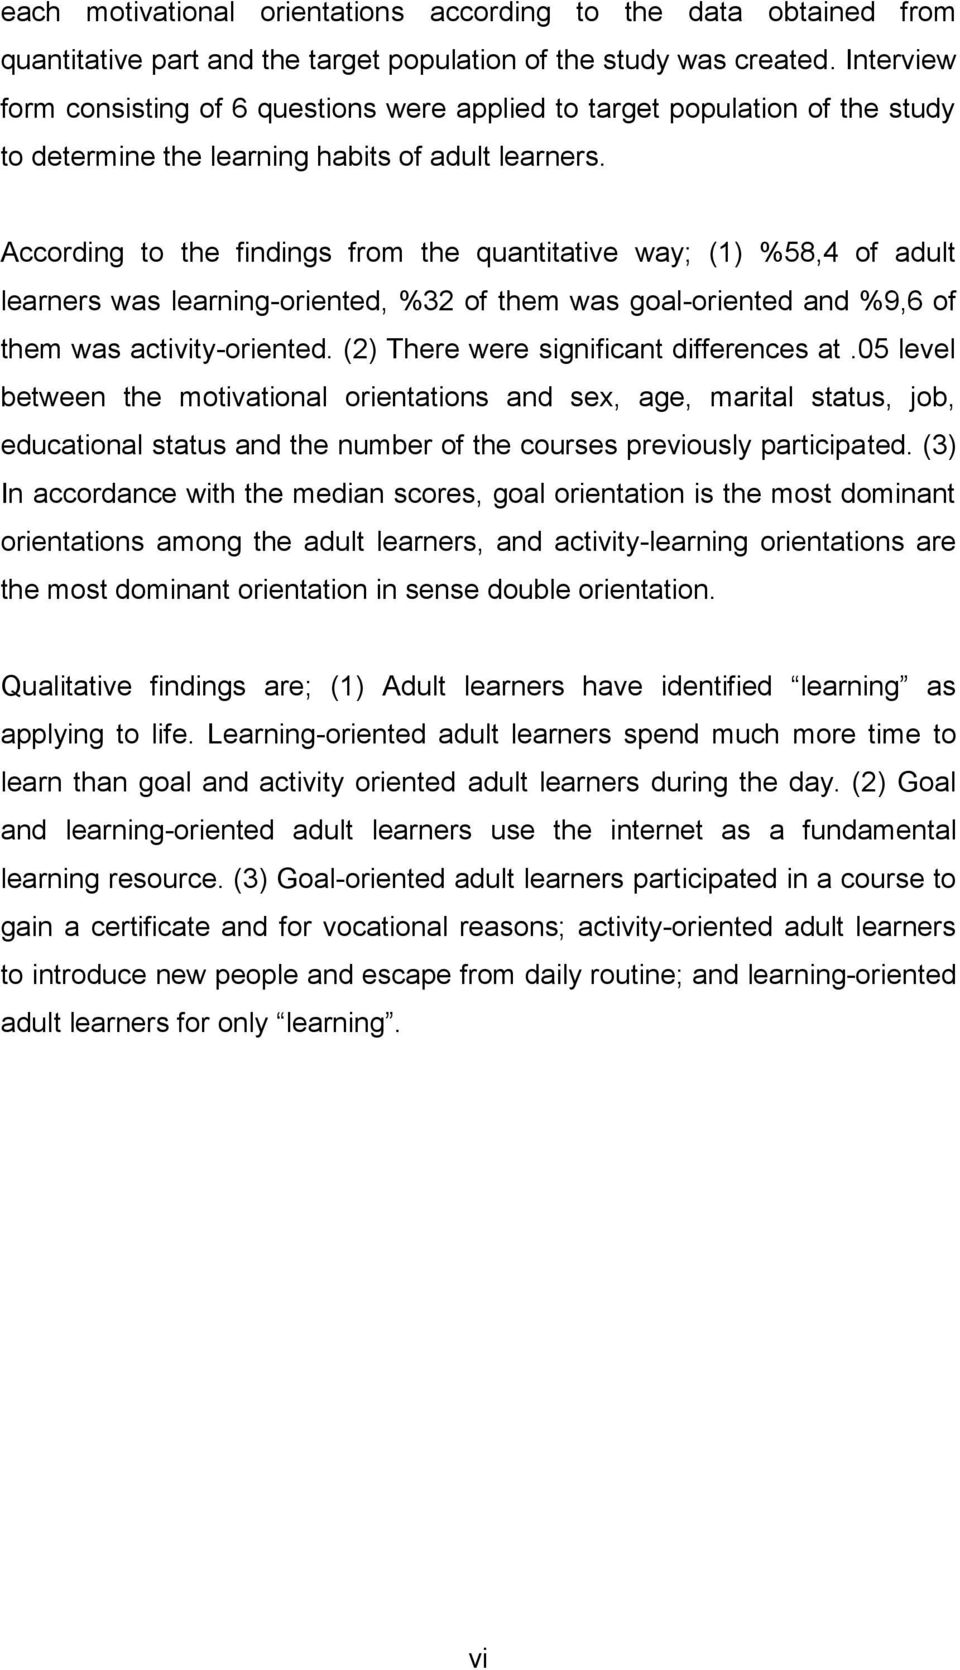 According to the findings from the quantitative way; (1) %58,4 of adult learners was learning-oriented, %32 of them was goal-oriented and %9,6 of them was activity-oriented.